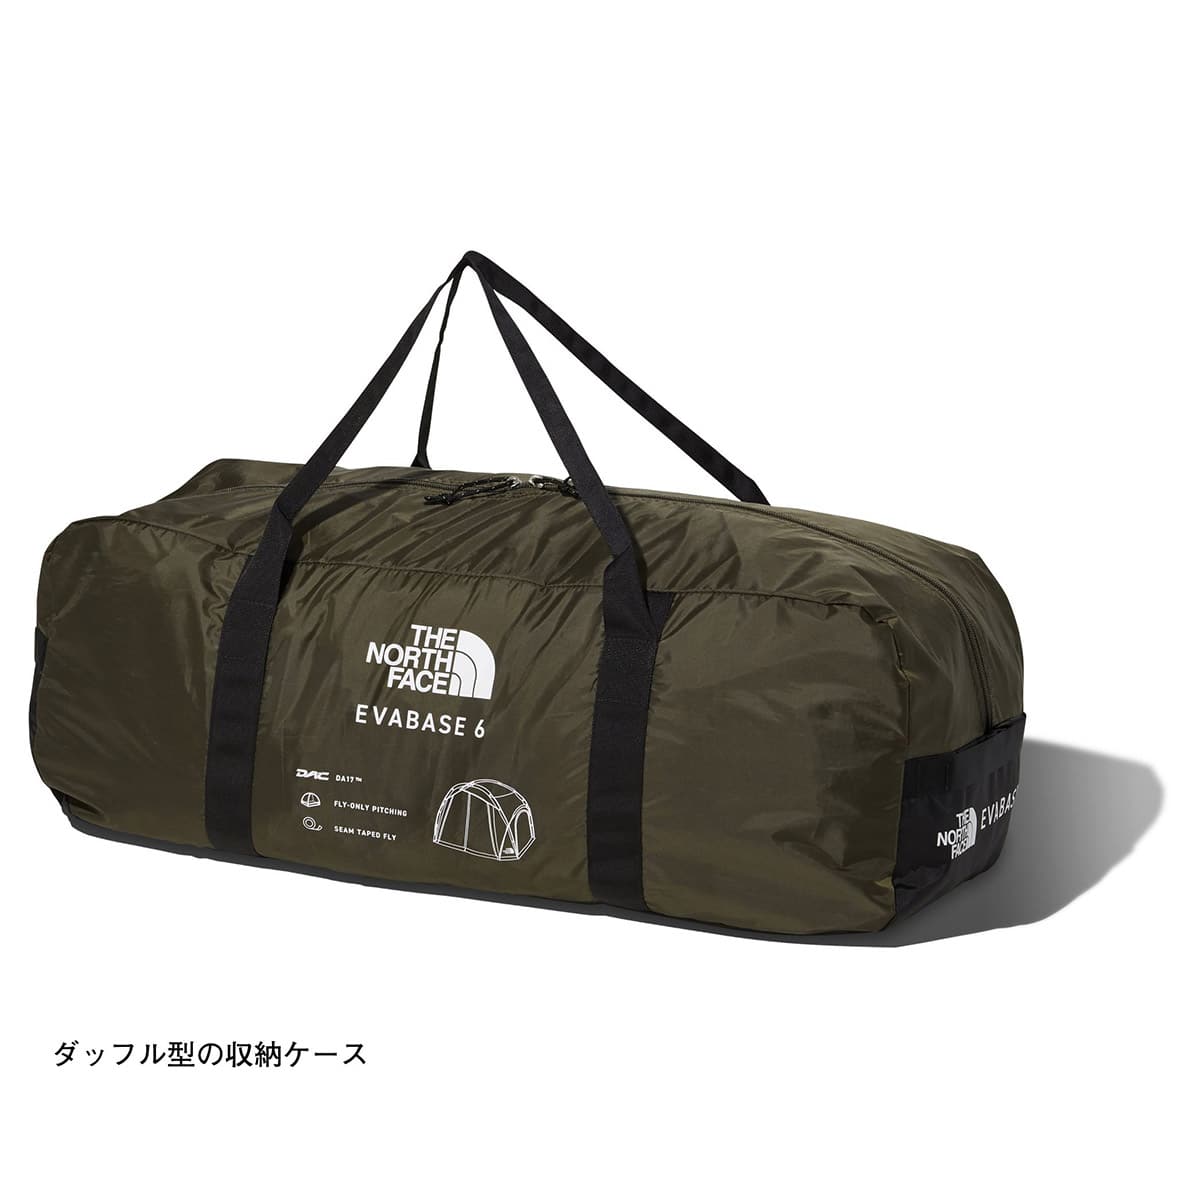 THE NORTH FACE EVABASE 6 NEWTAUPE 21FW-I